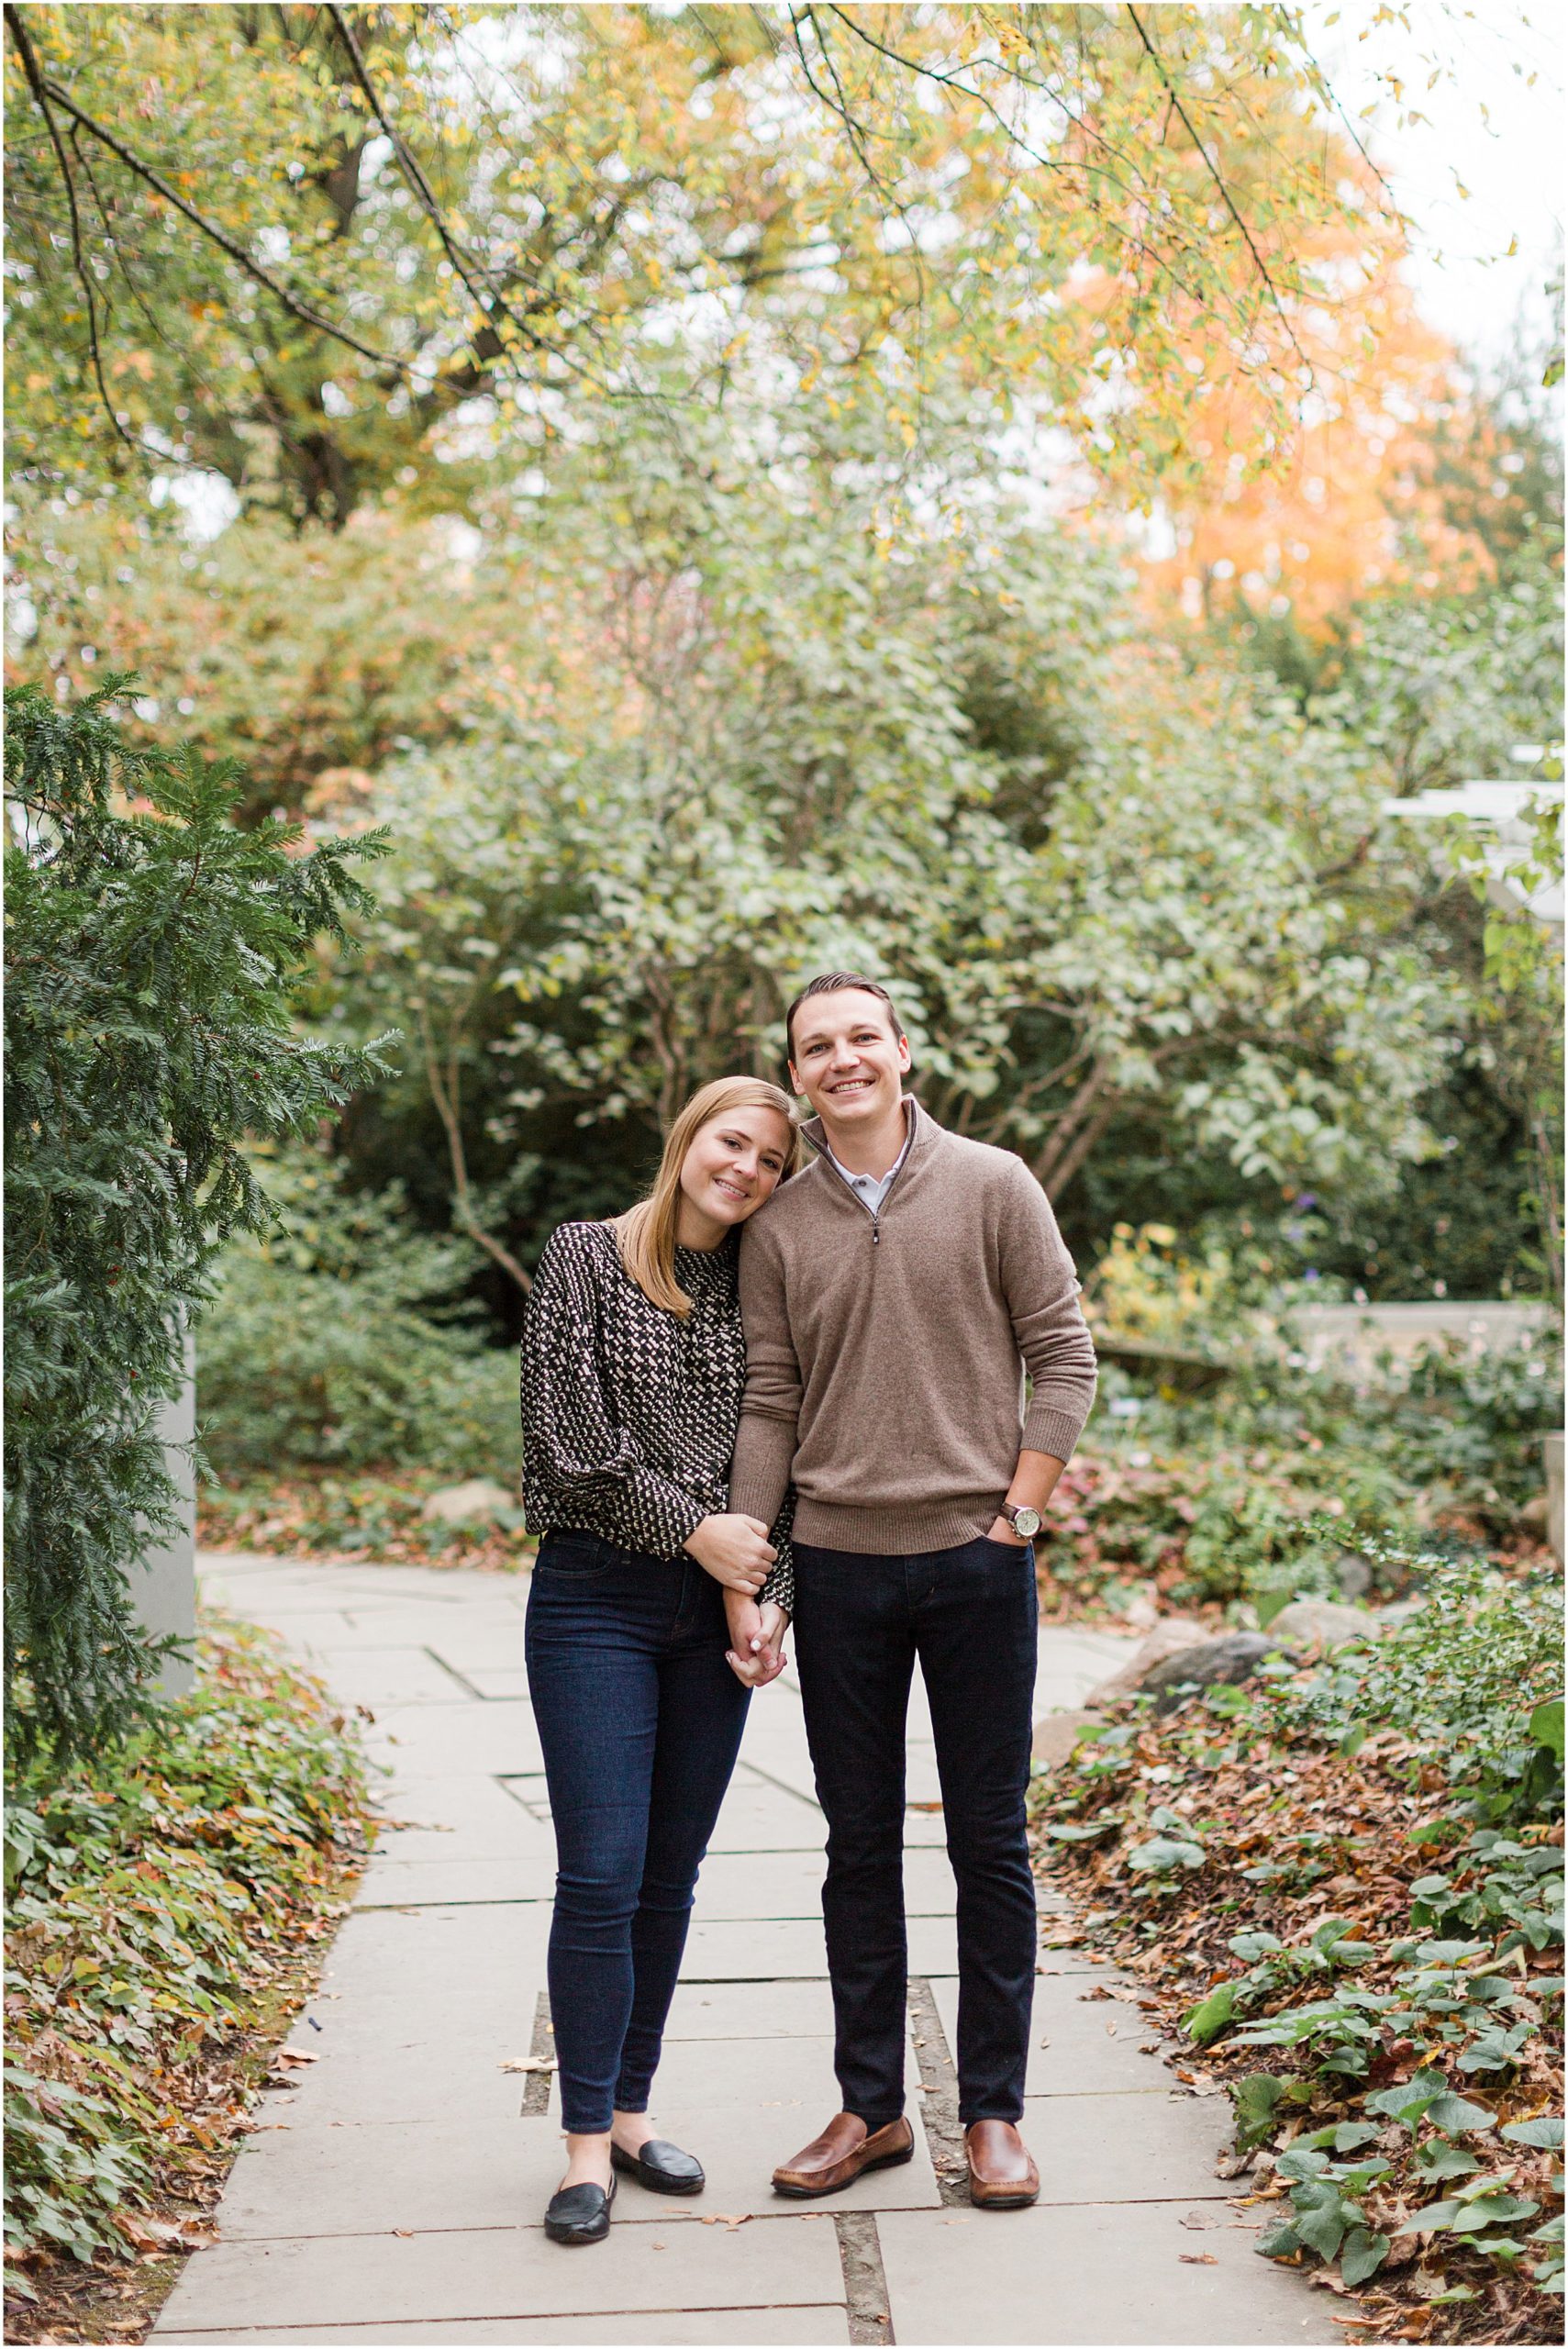 Autumn Newfields Engagement Session_0012.jpg